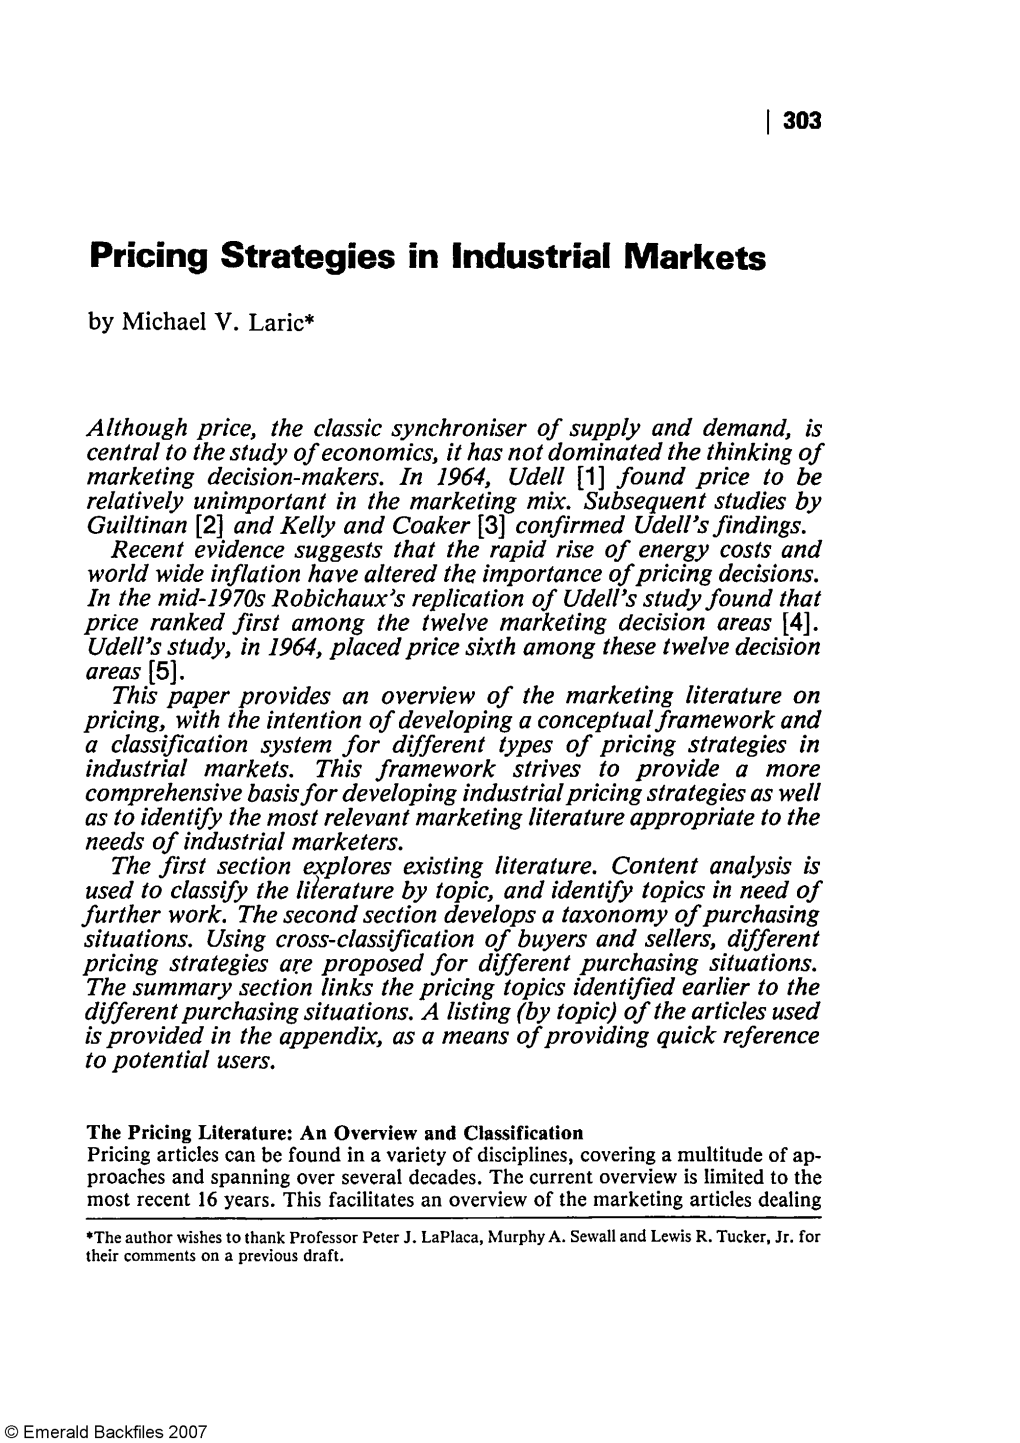 Pricing Strategies in Industrial Markets by Michael V